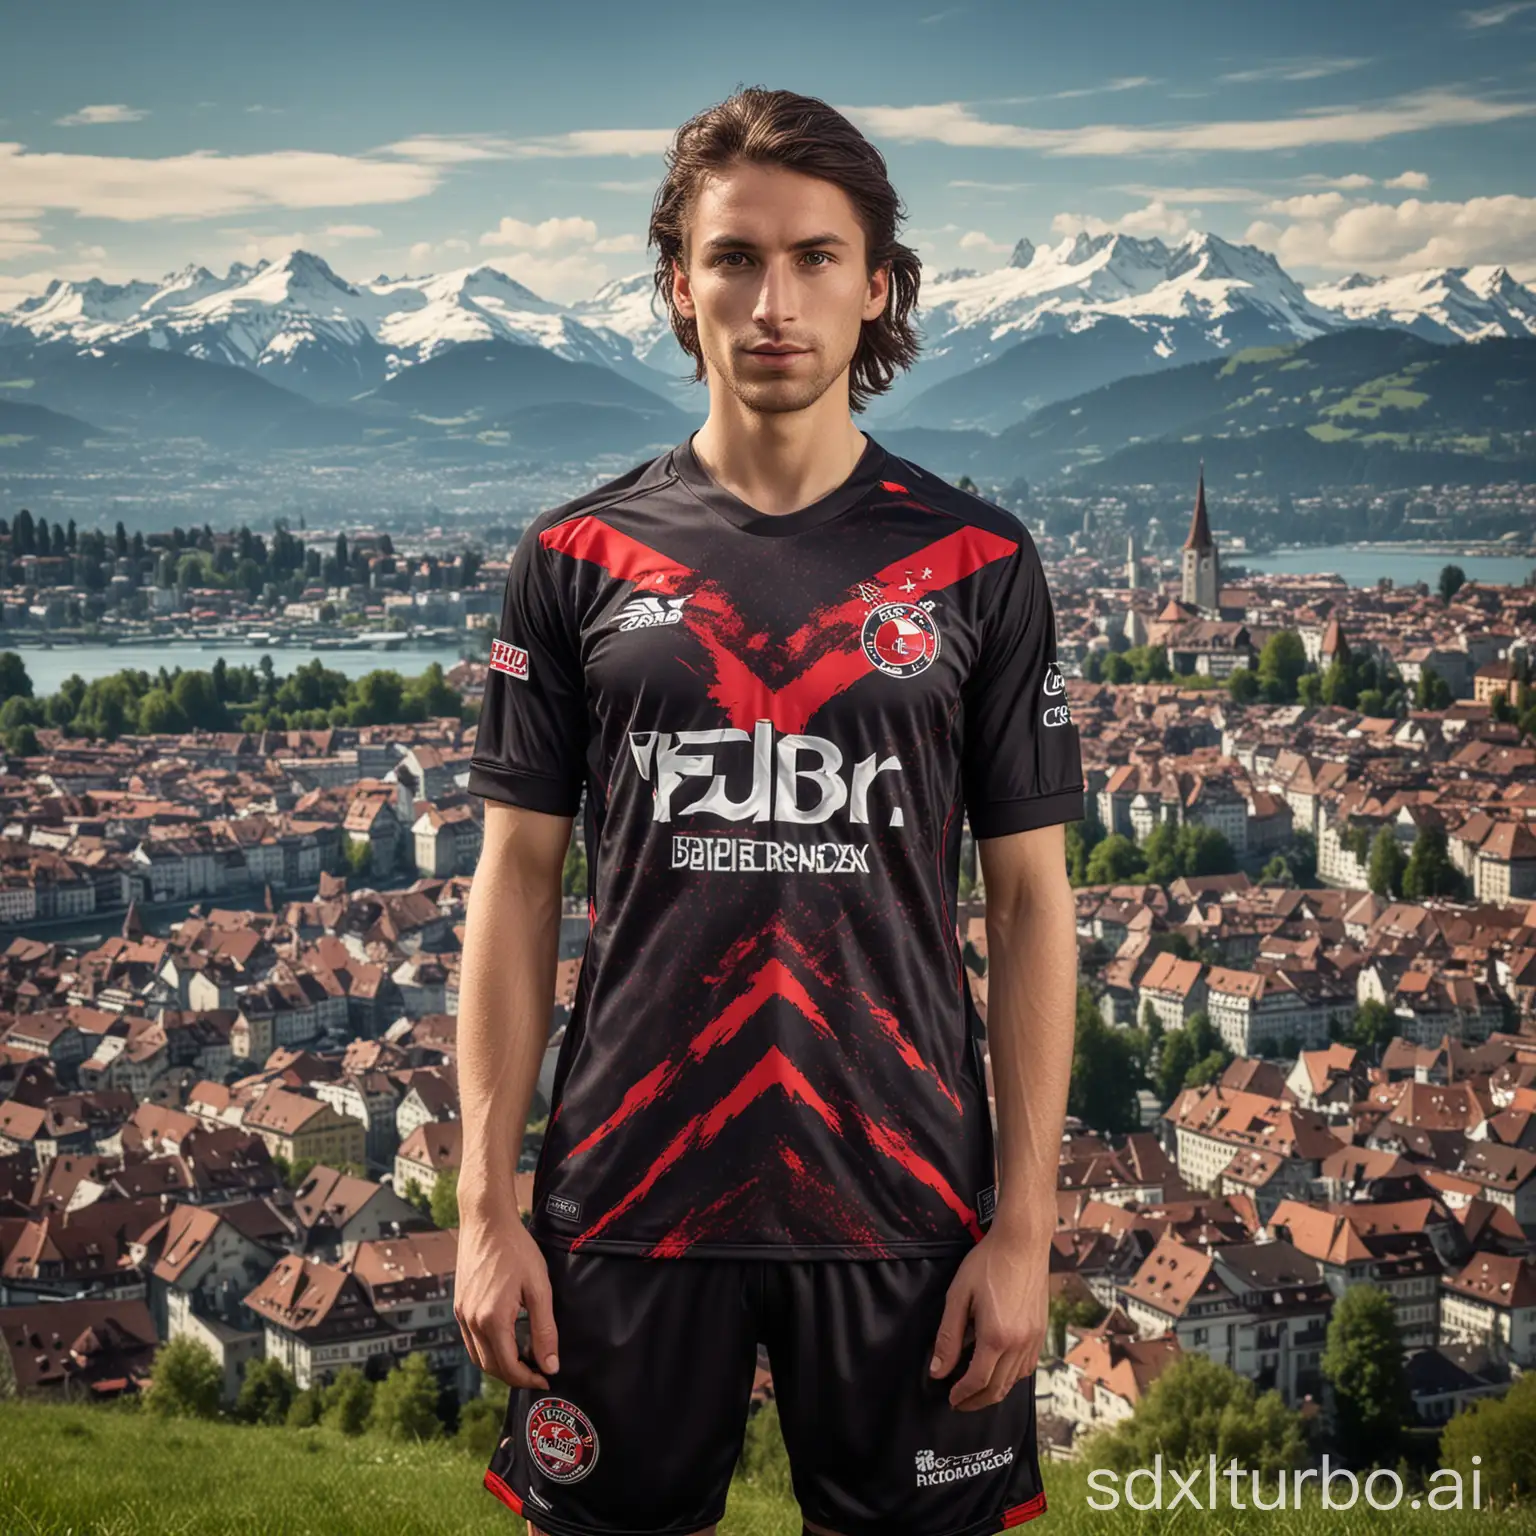 New-Black-and-Red-Soccer-Jersey-Promotional-Image-with-City-of-Bern-Background